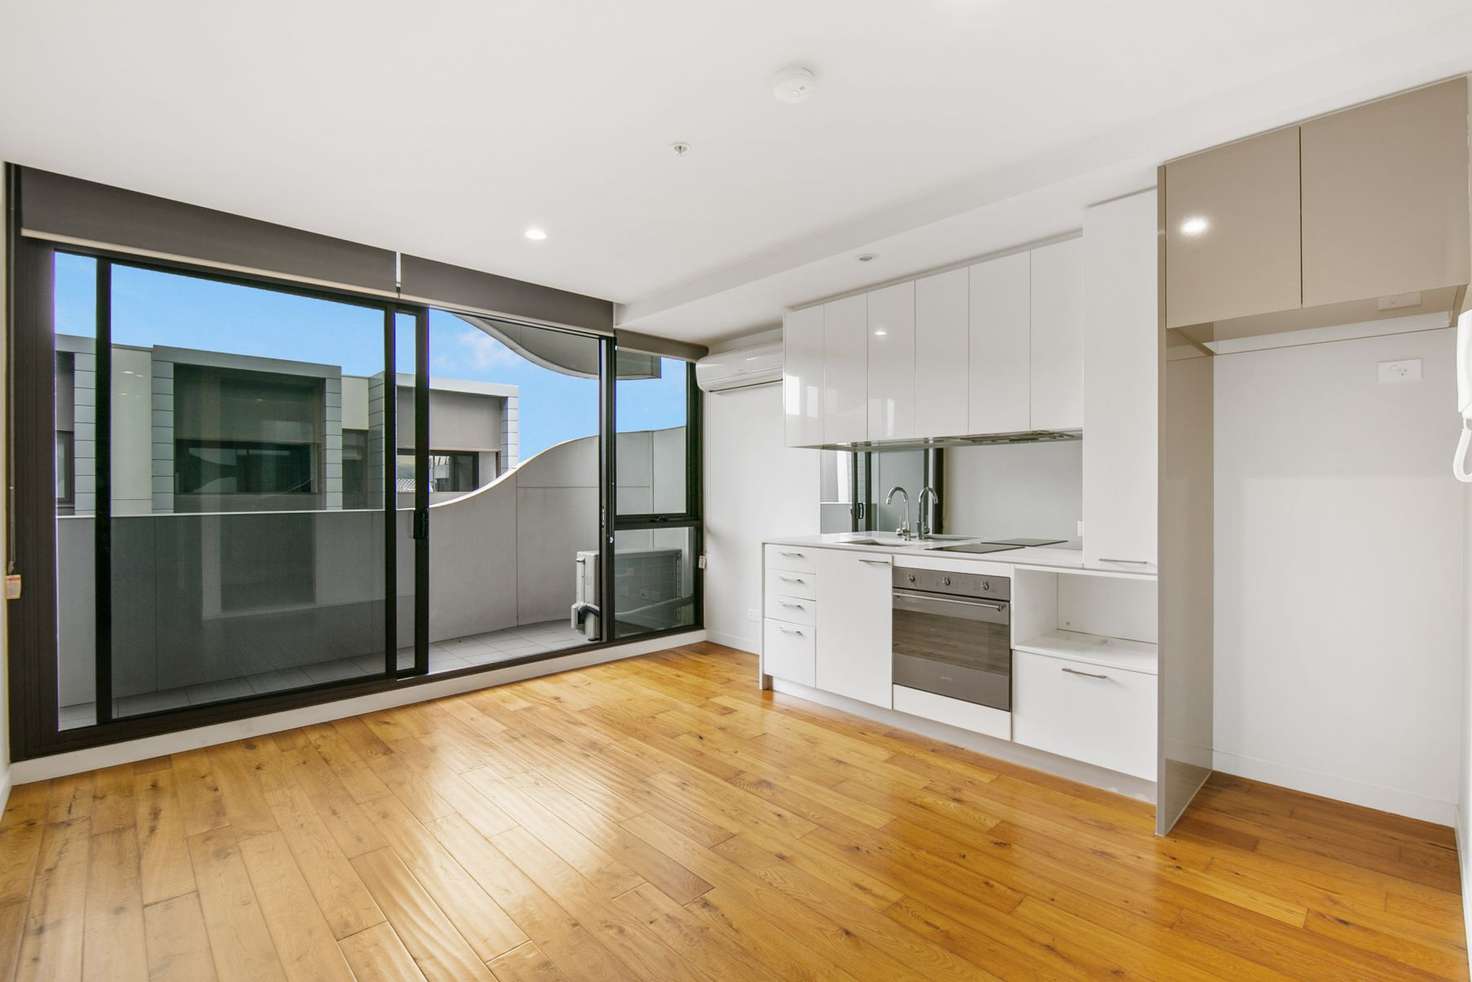 Main view of Homely apartment listing, 1421/176 Edward Street, Brunswick East VIC 3057